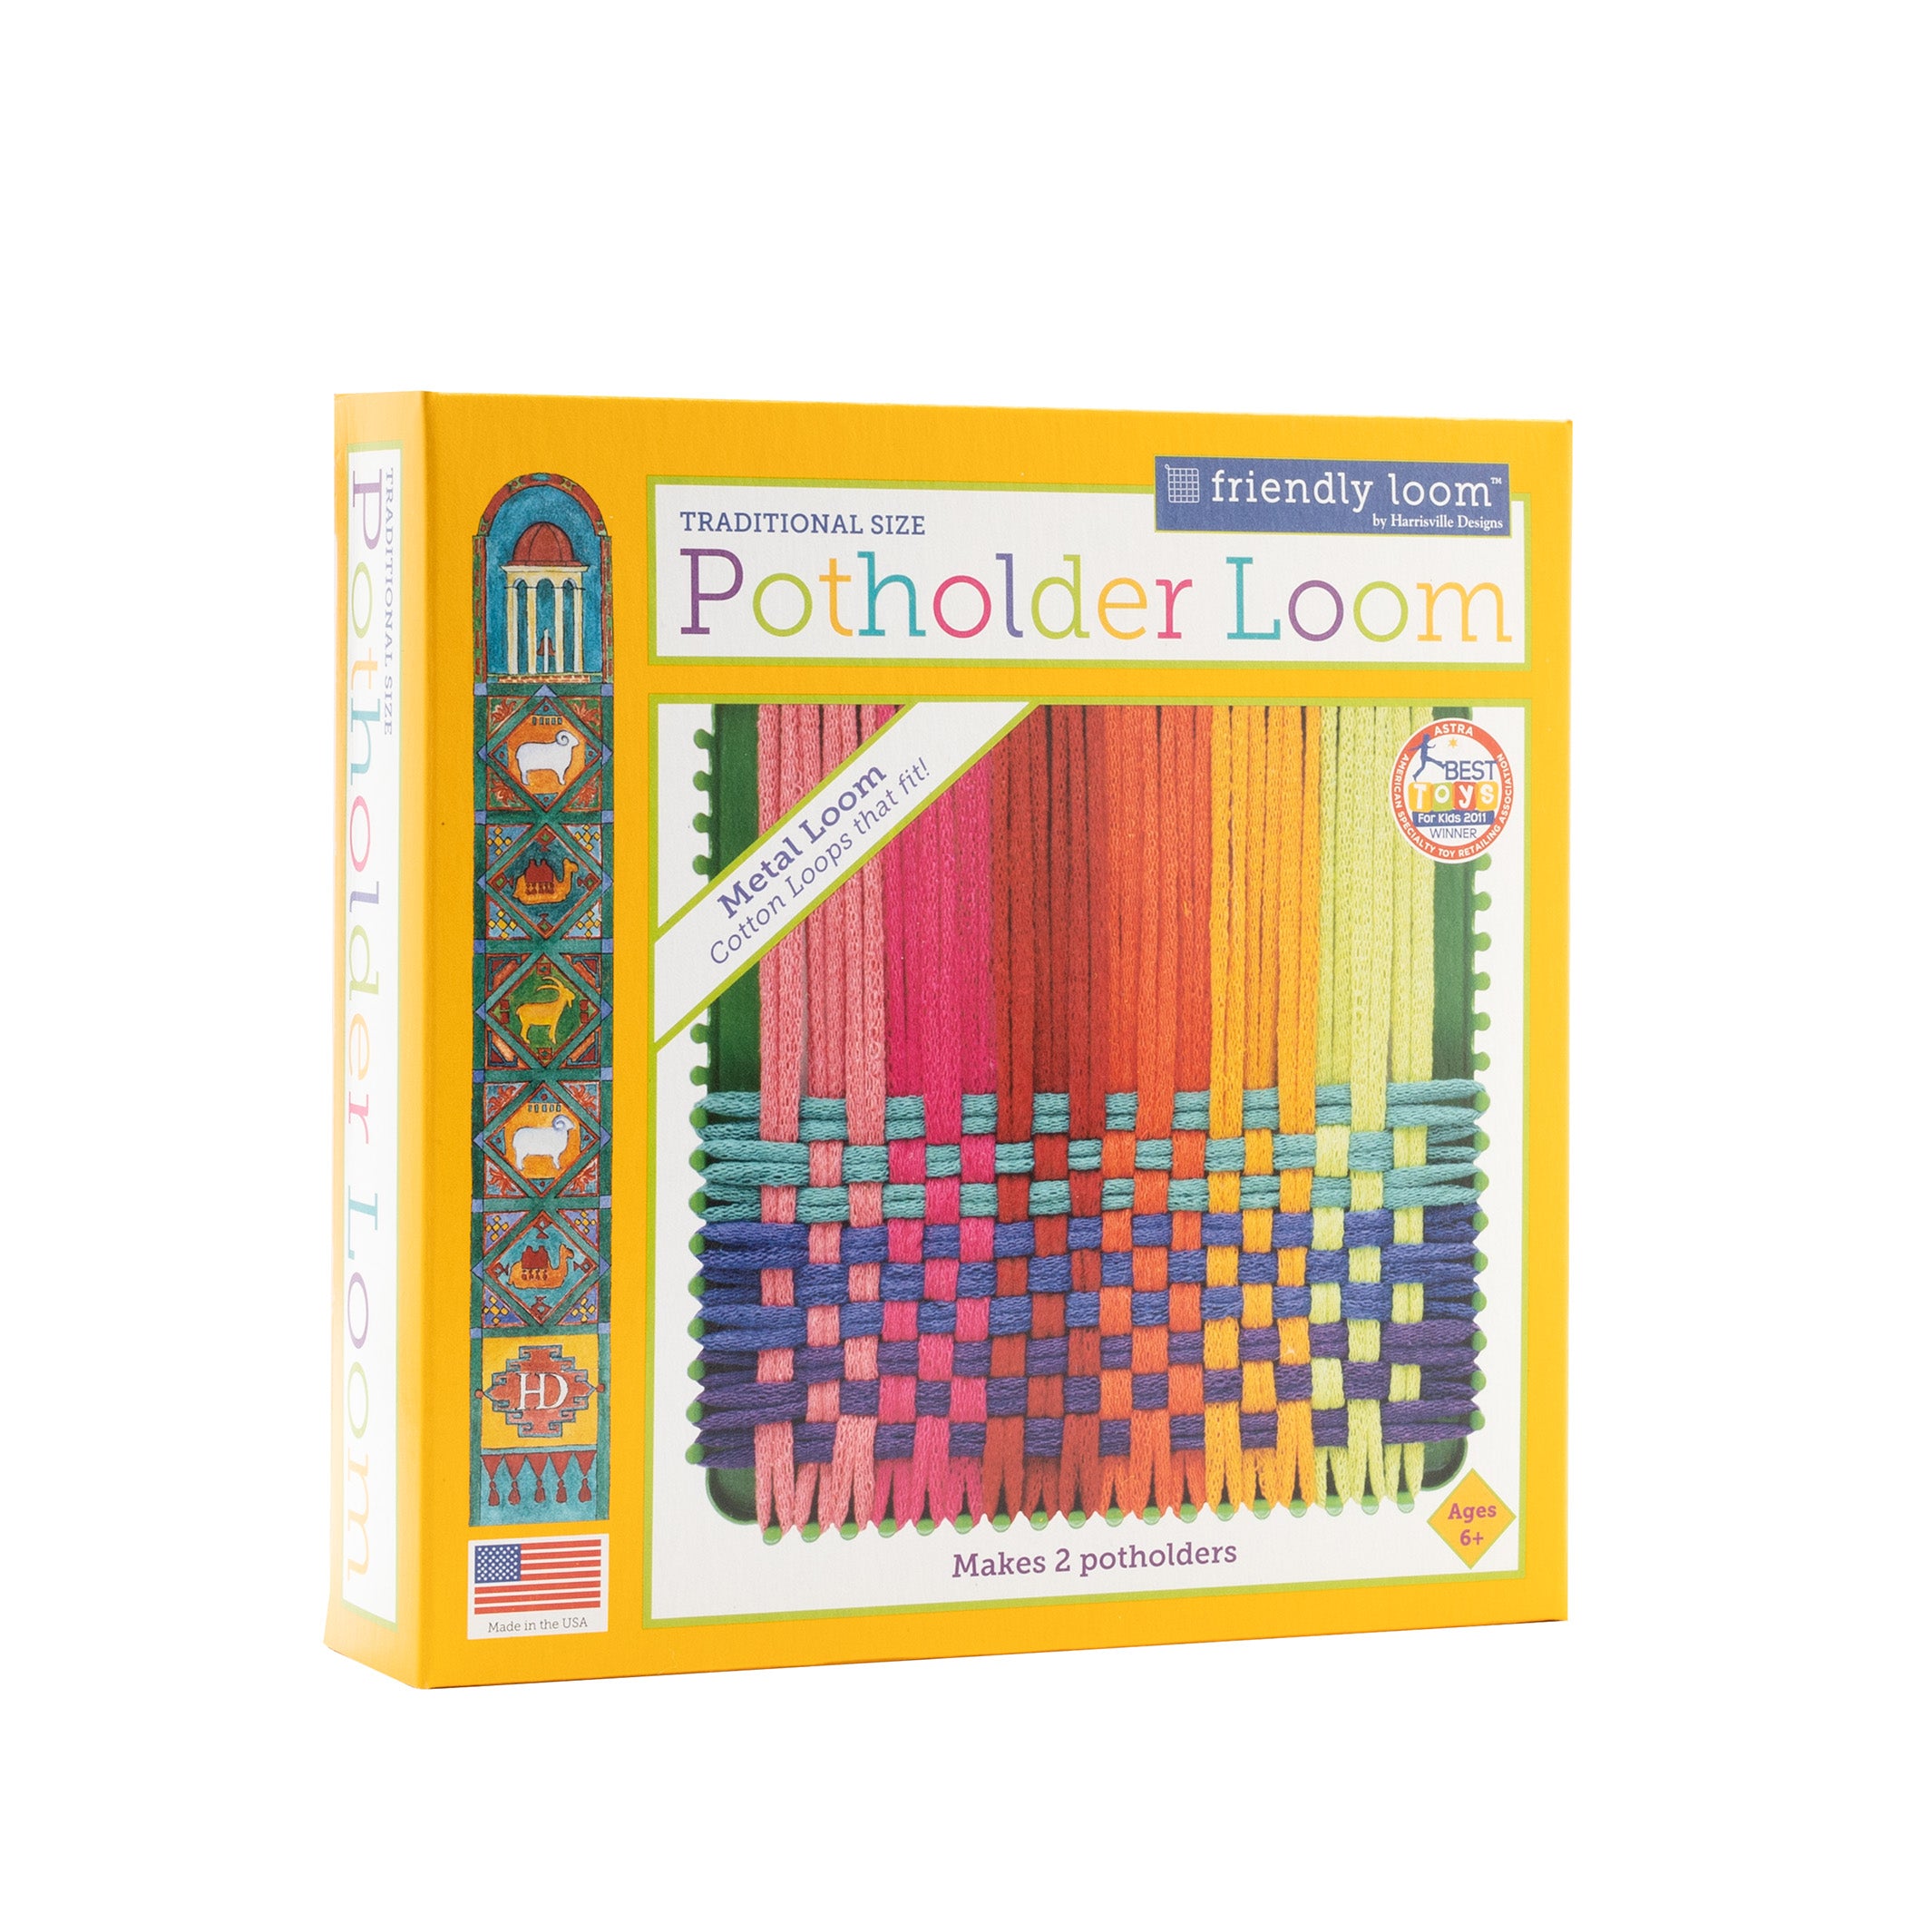 Friendly Loom Potholder Cotton Loops 7 Traditional Size Loops Make 2  Potholders, Weaving Crafts for Kids and Adults-Pewter by Harrisville Designs